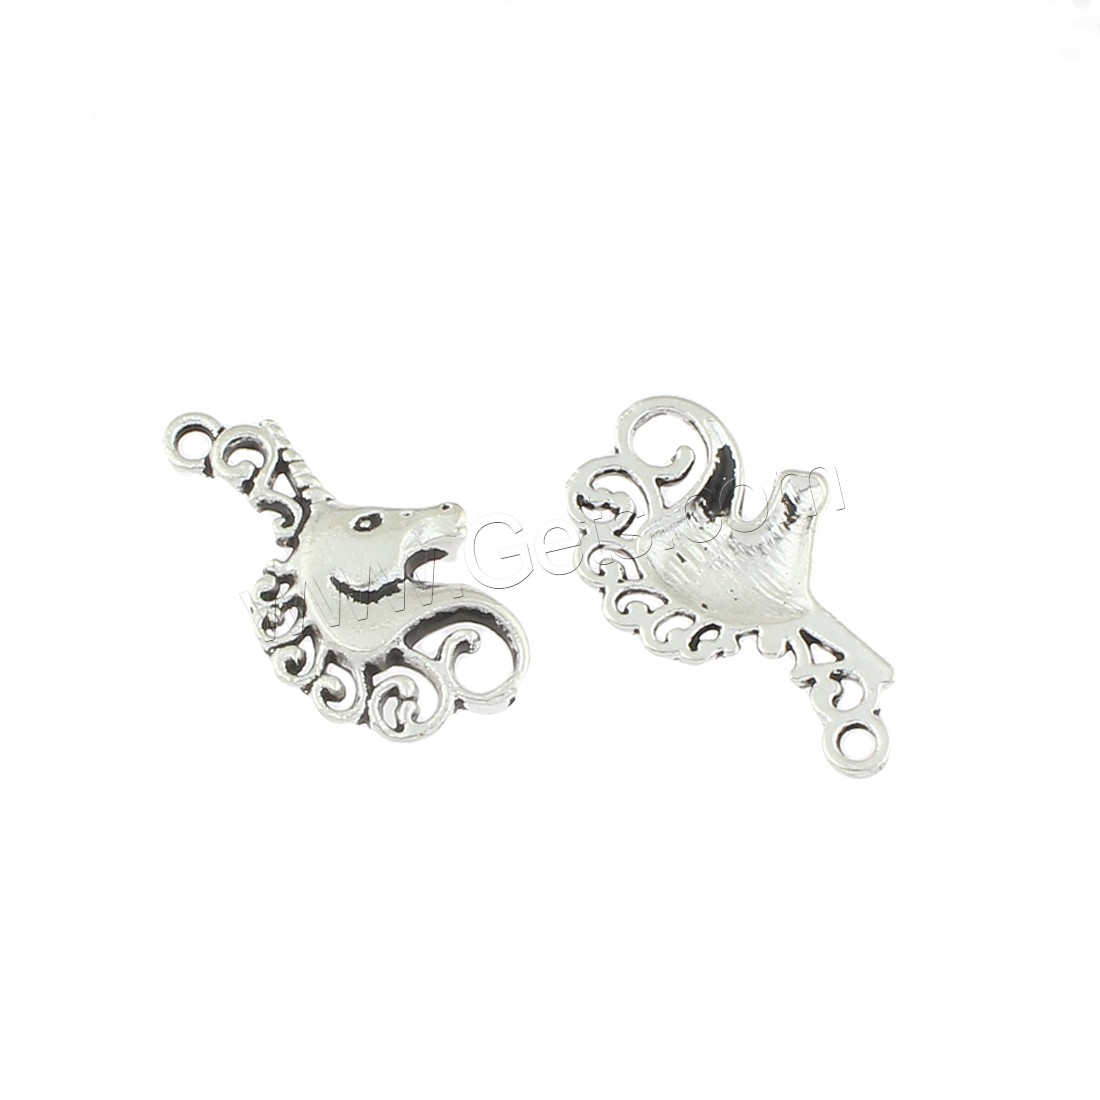 Zinc Alloy Animal Pendants, Horse, antique silver color plated, 15x26x3mm, Hole:Approx 1mm, Approx 270PCs/Bag, Sold By Bag